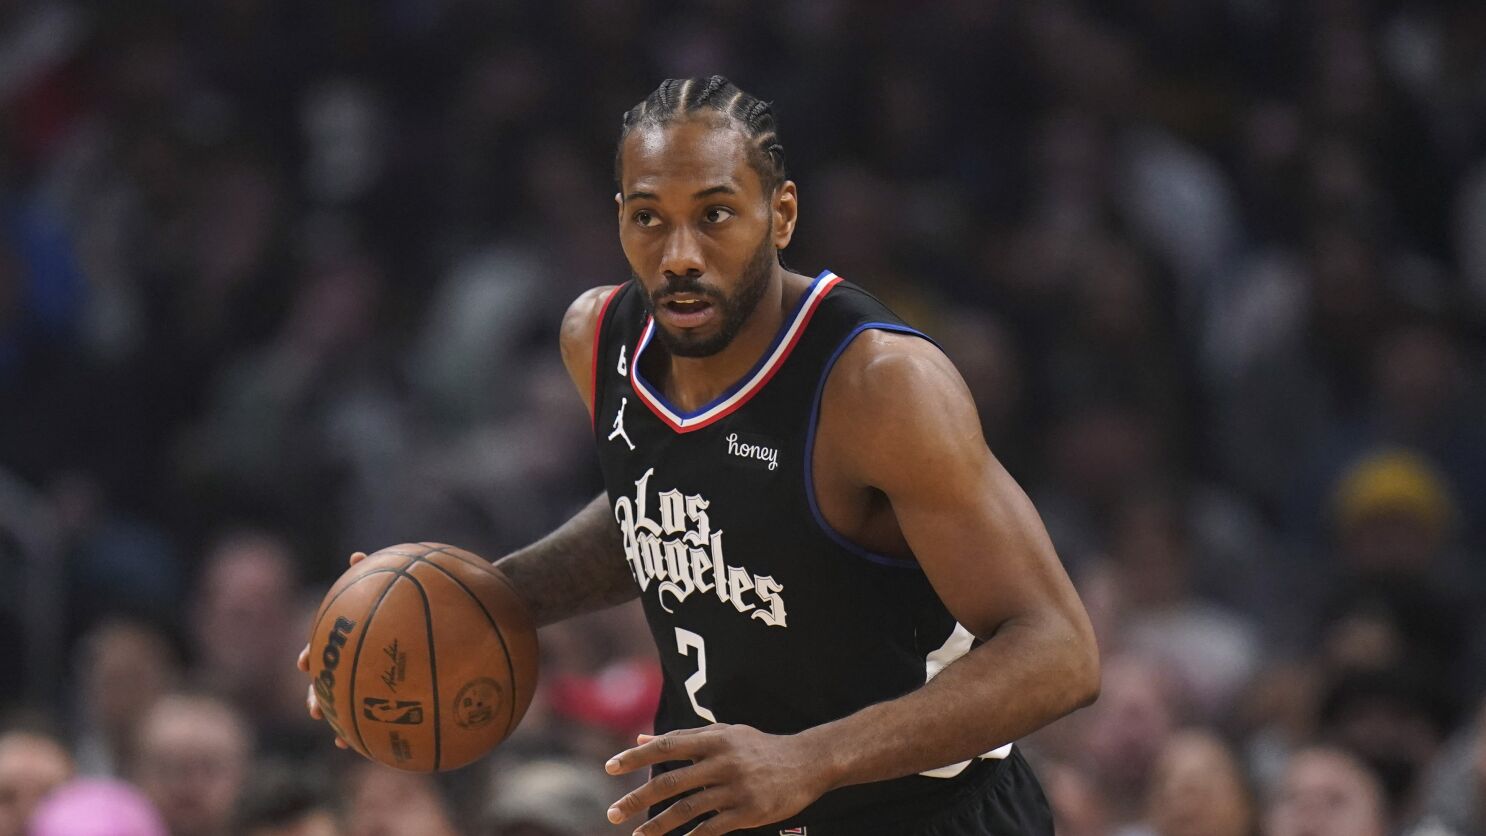 NBA Kawhi Leonard LA Clippers Trade Deal Likely Unless Player Reduces His Fees